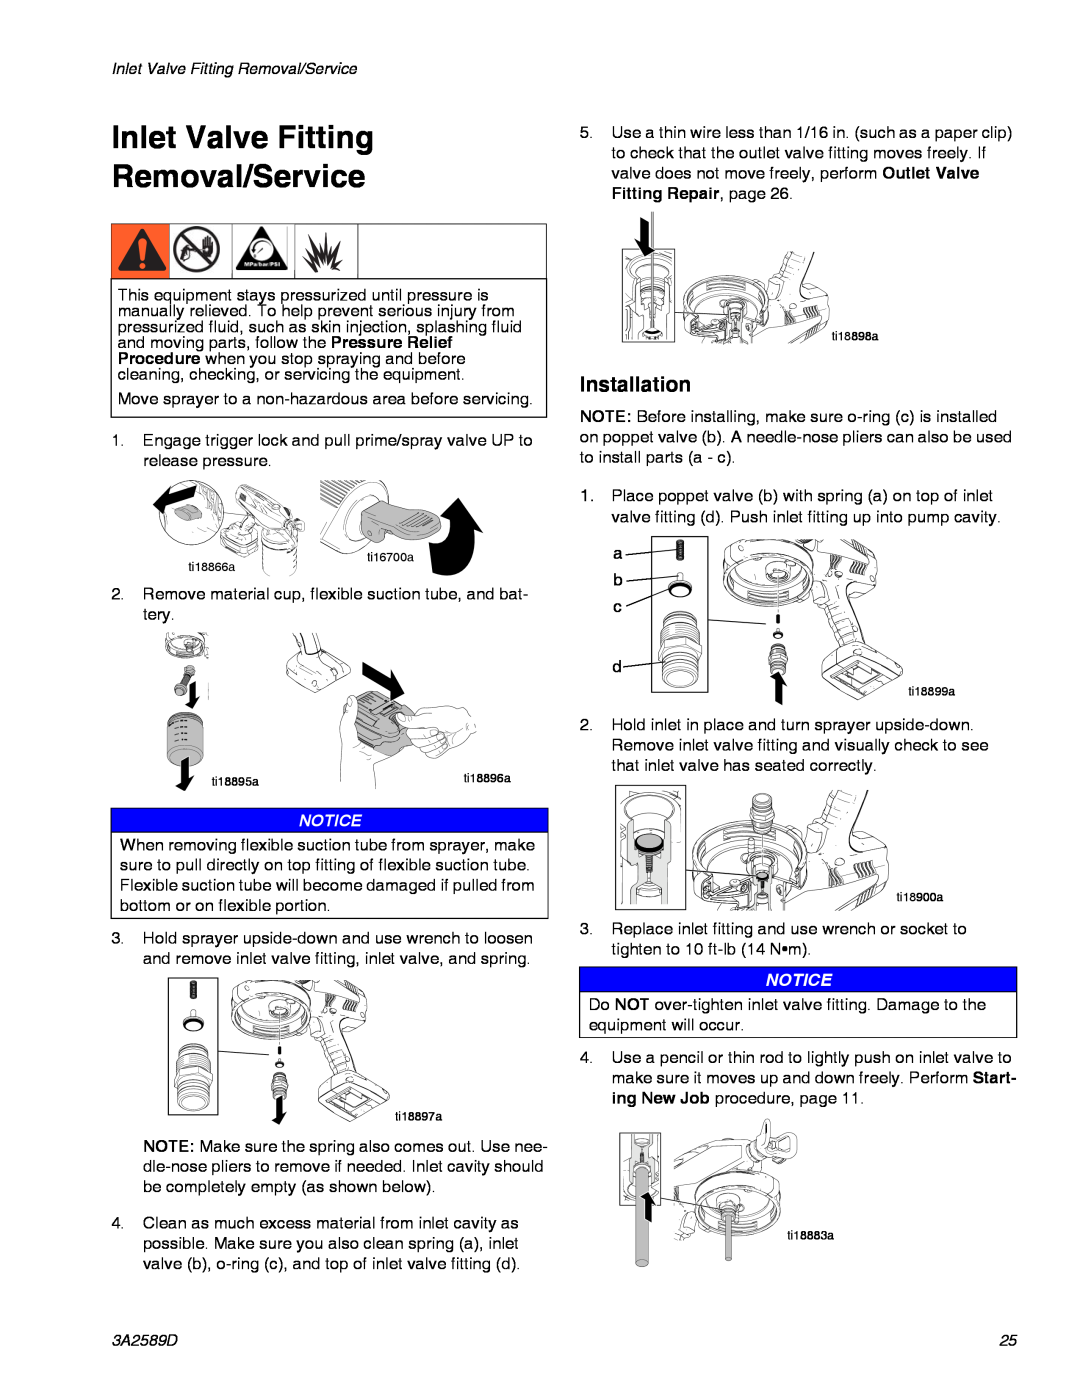 Graco 3A2589D important safety instructions Inlet Valve Fitting Removal/Service, Installation 